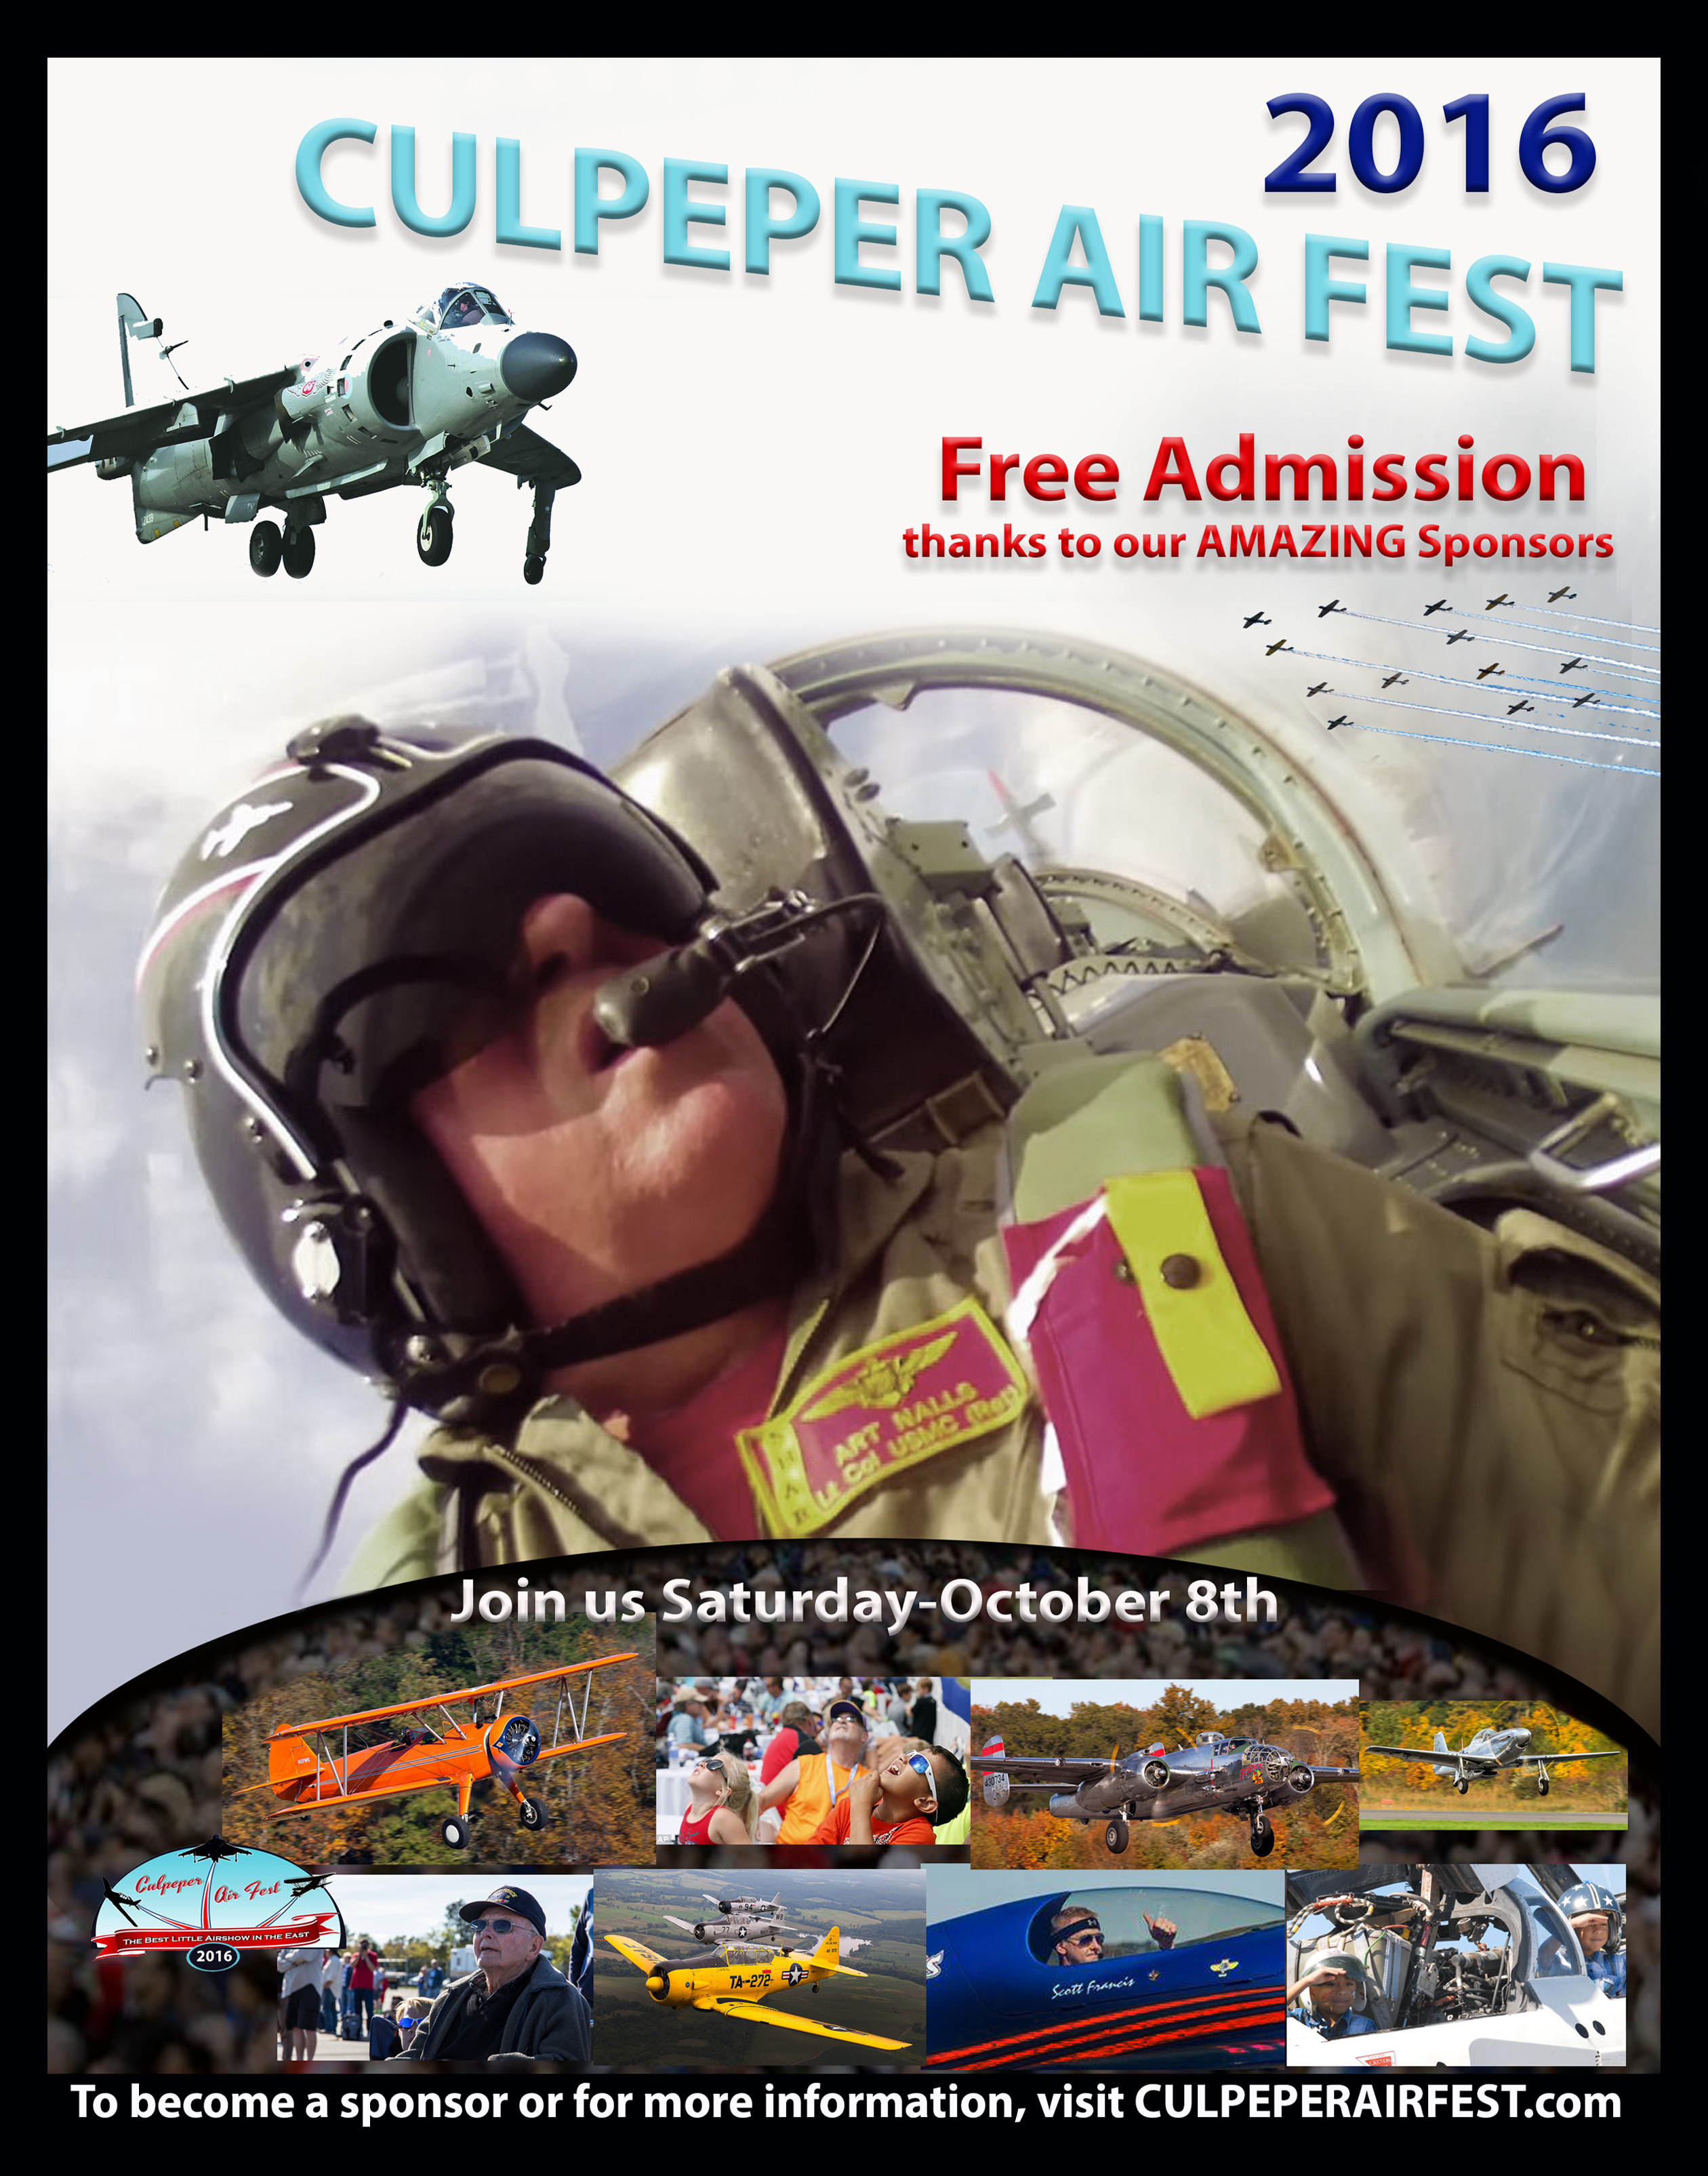 Culpeper Air Fest “The Best Little Airshow in the East”